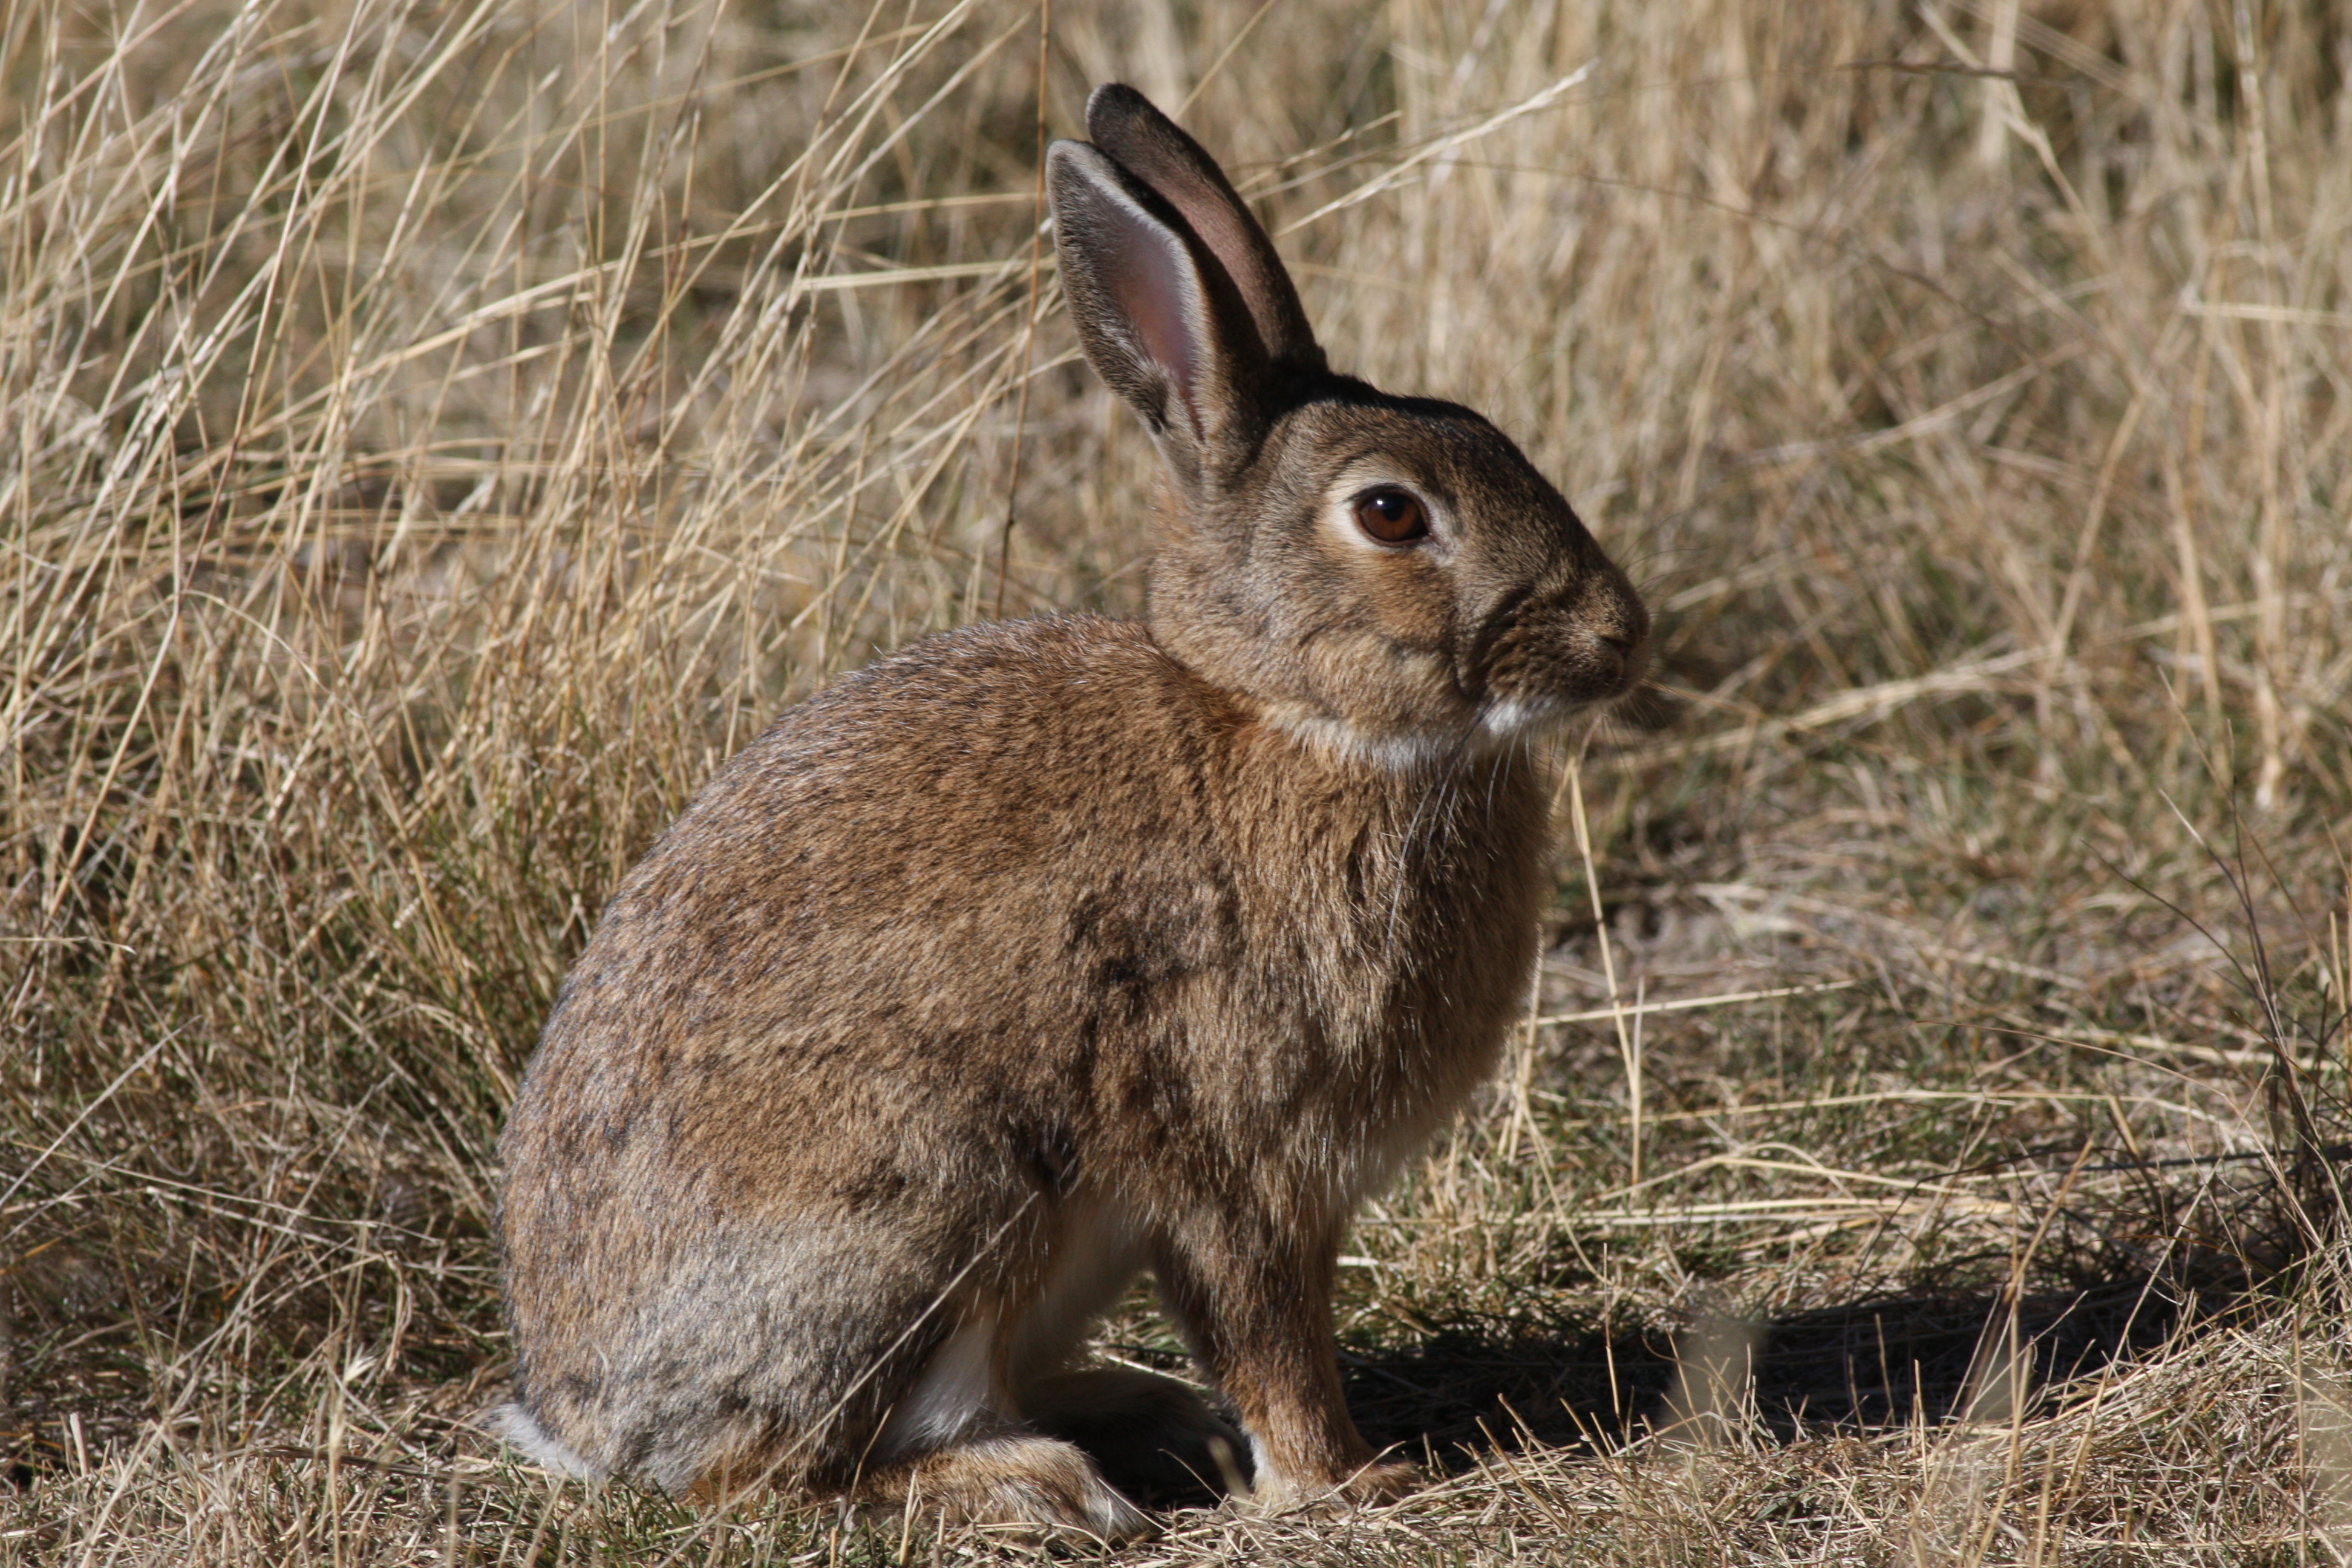 The European rabbit – cute for some but a pest for our agricultural industry. 